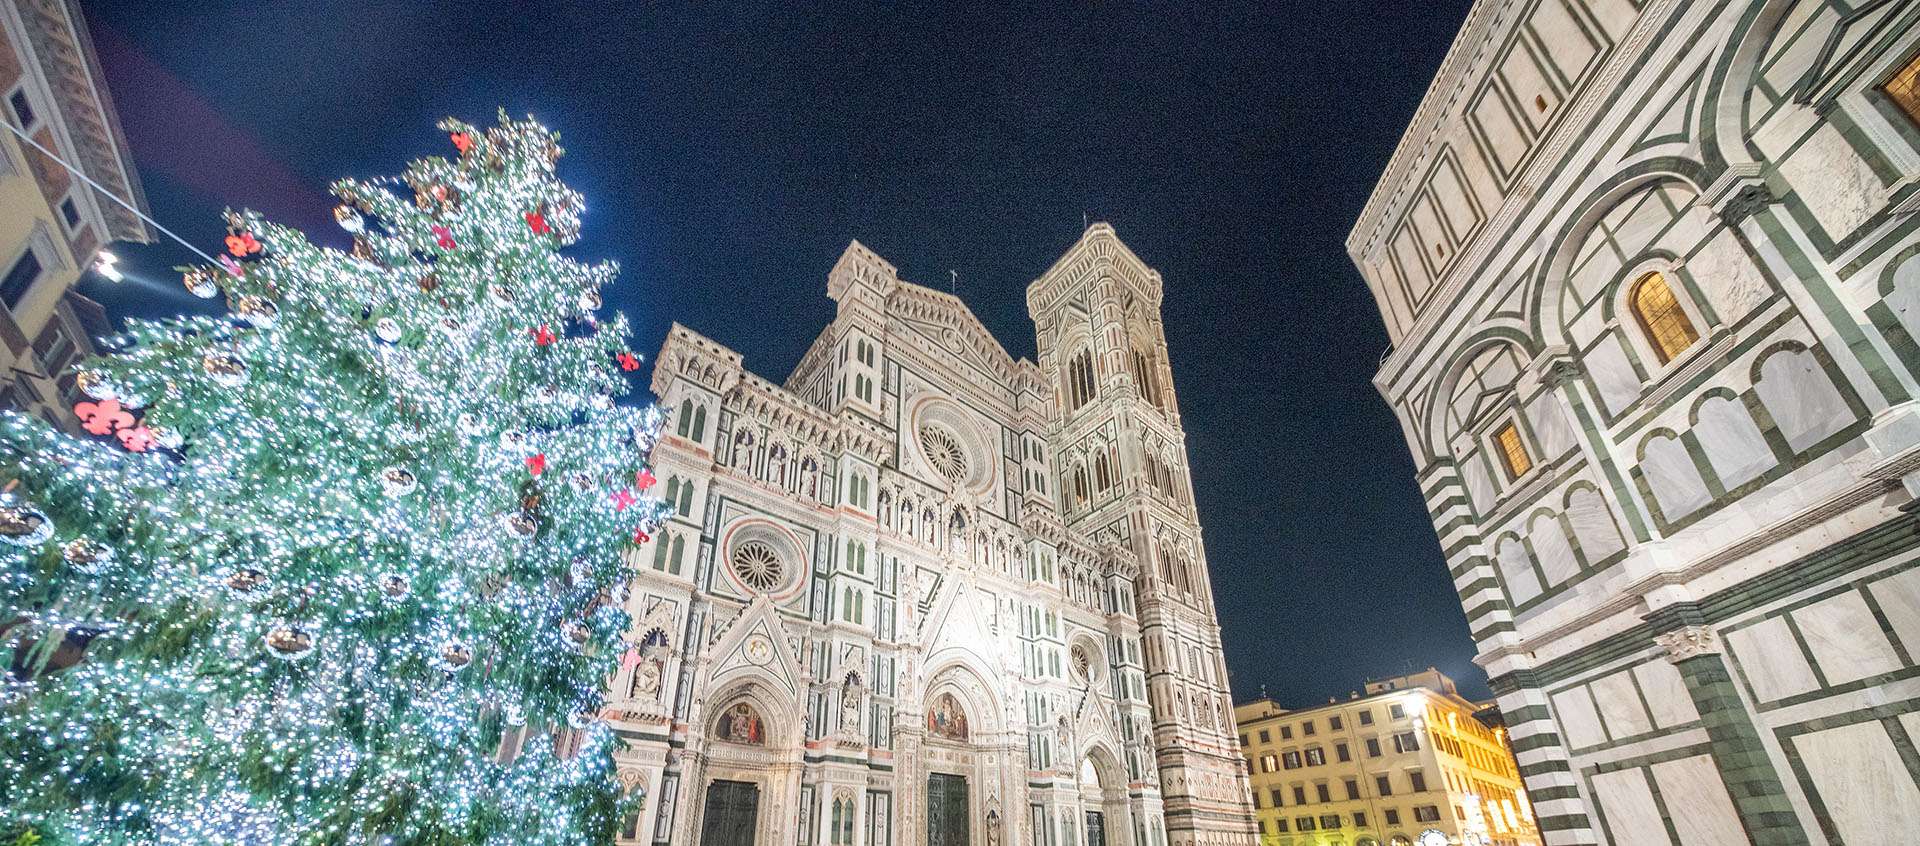 Top Tips for Christmas in Italy